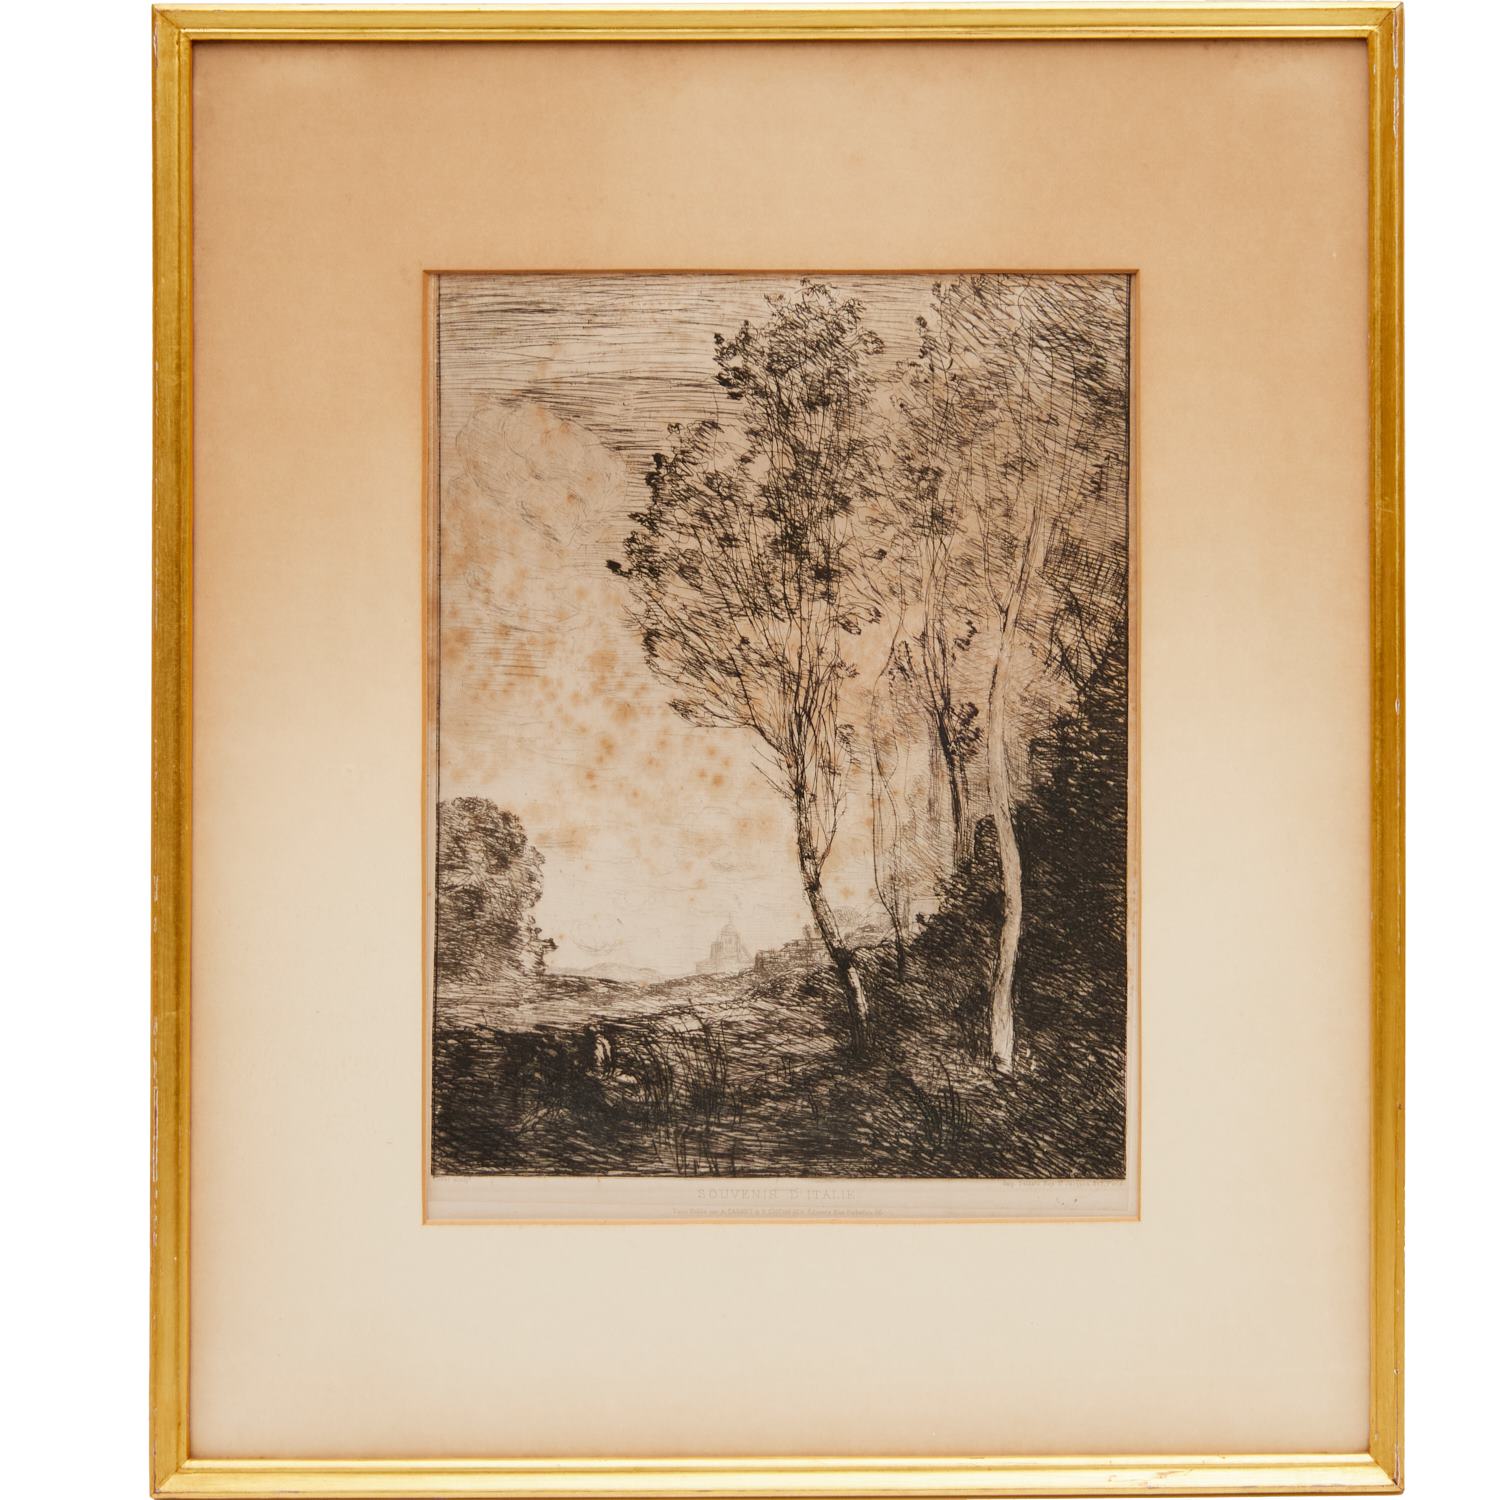 JEAN BAPTISTE CAMILLE COROT ETCHING 361ce9